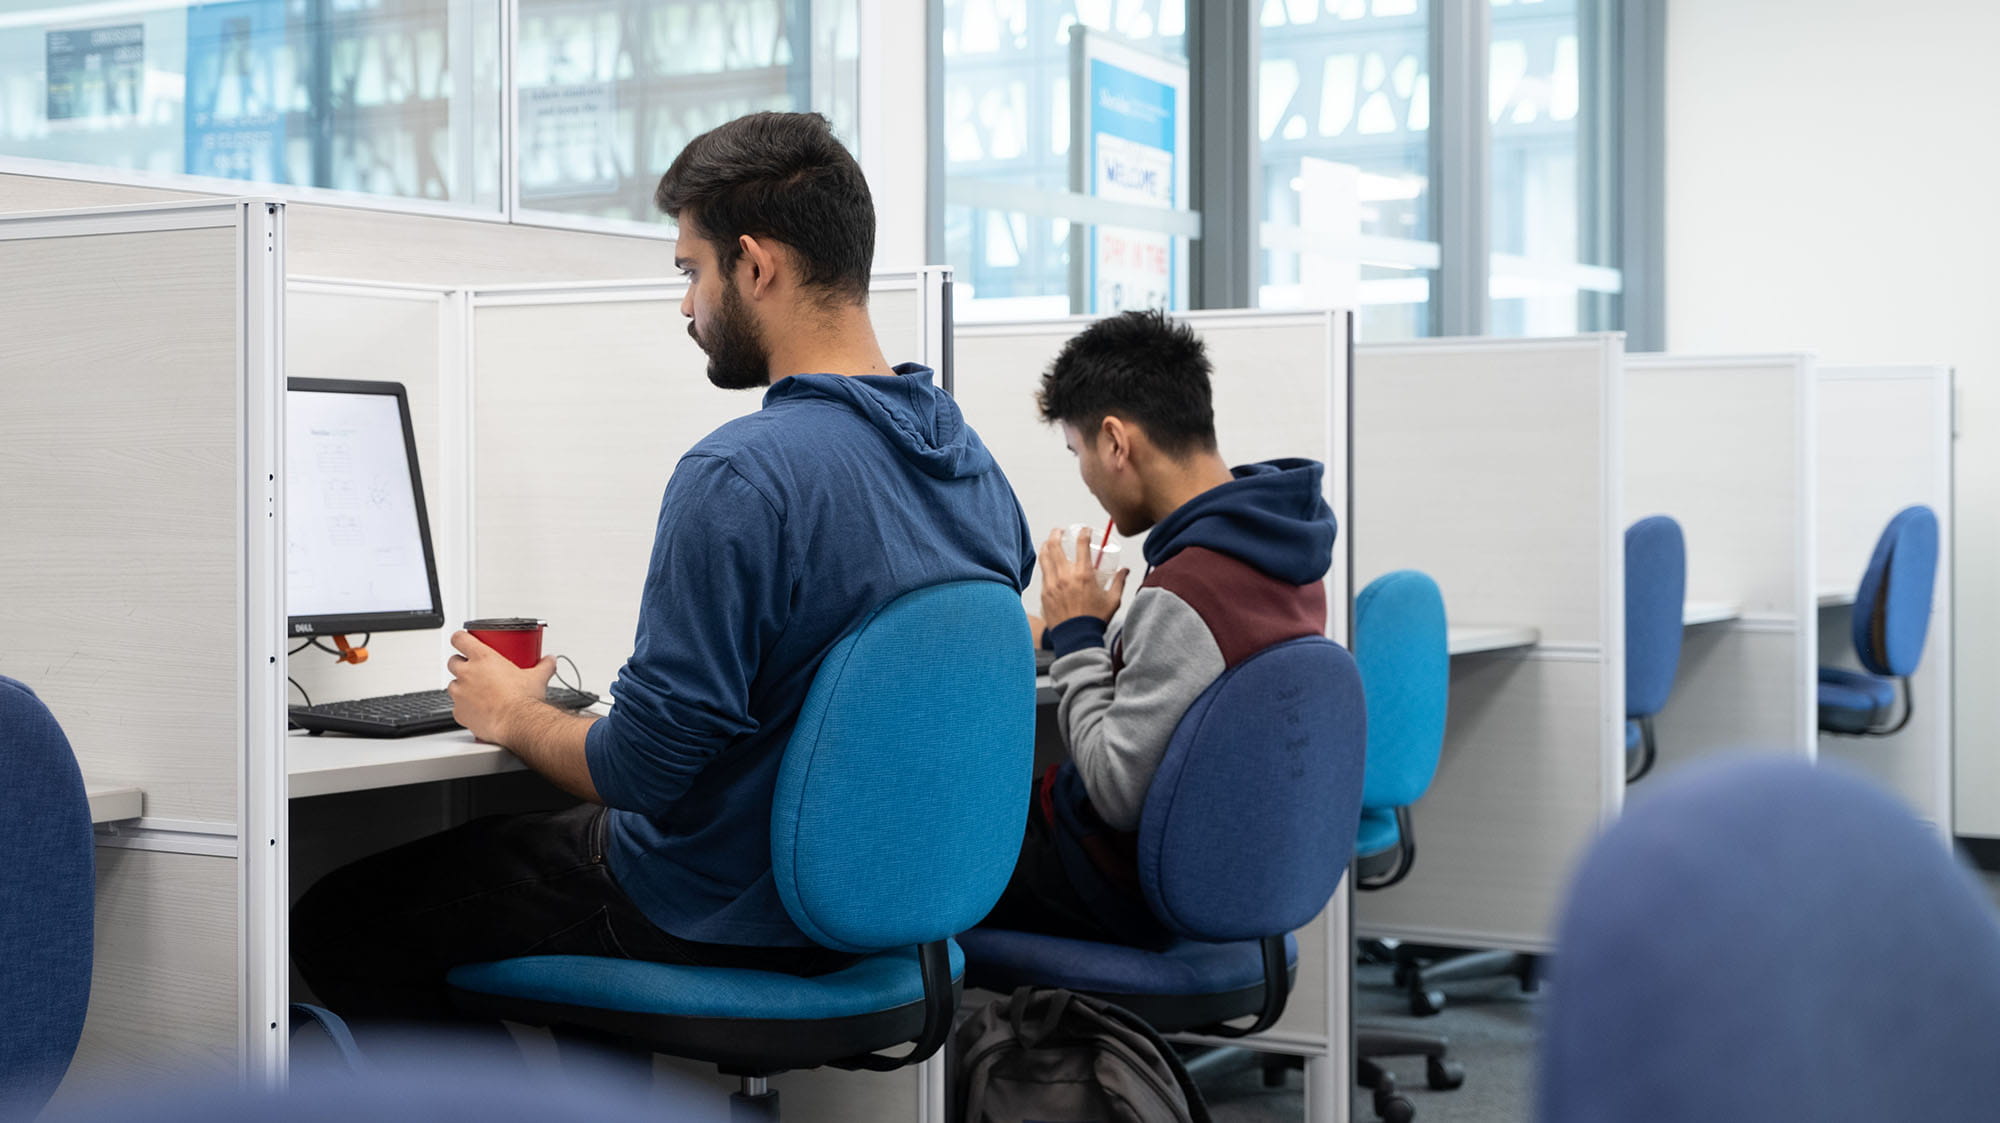 Students working at computer stations in the library